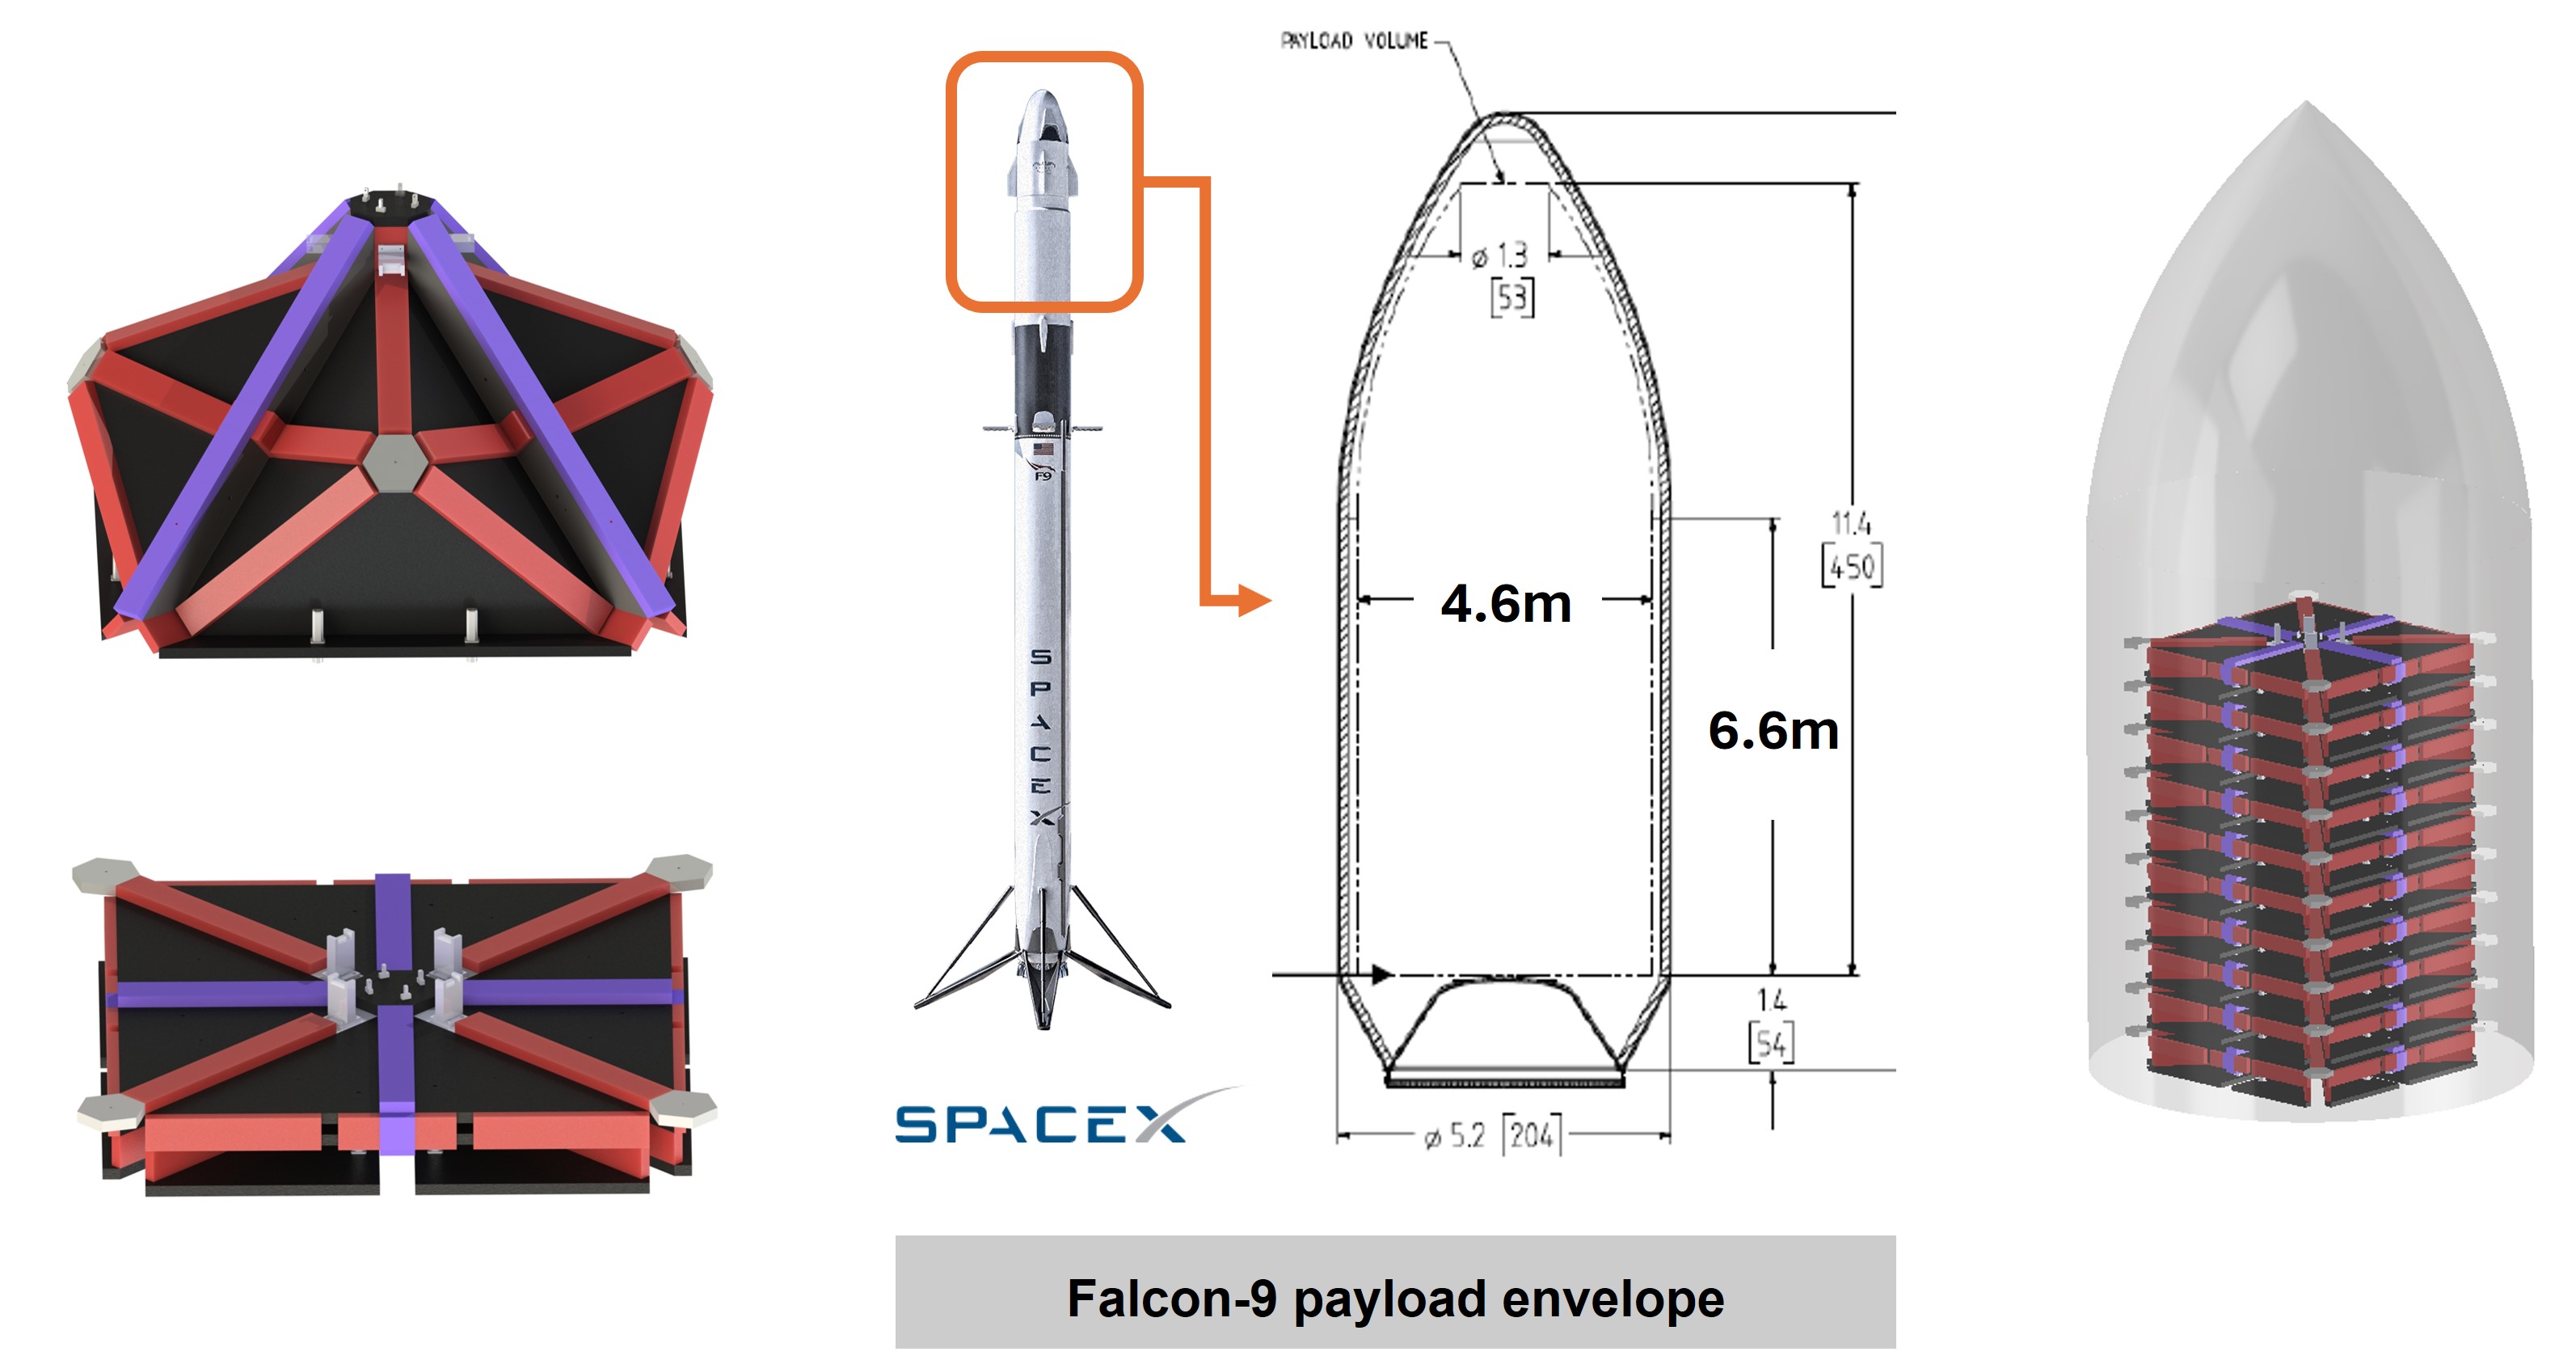 Figure 3. Efficient storage of multiple shelters in one launch vehicle (Launch vehicle image credit: SpaceX)